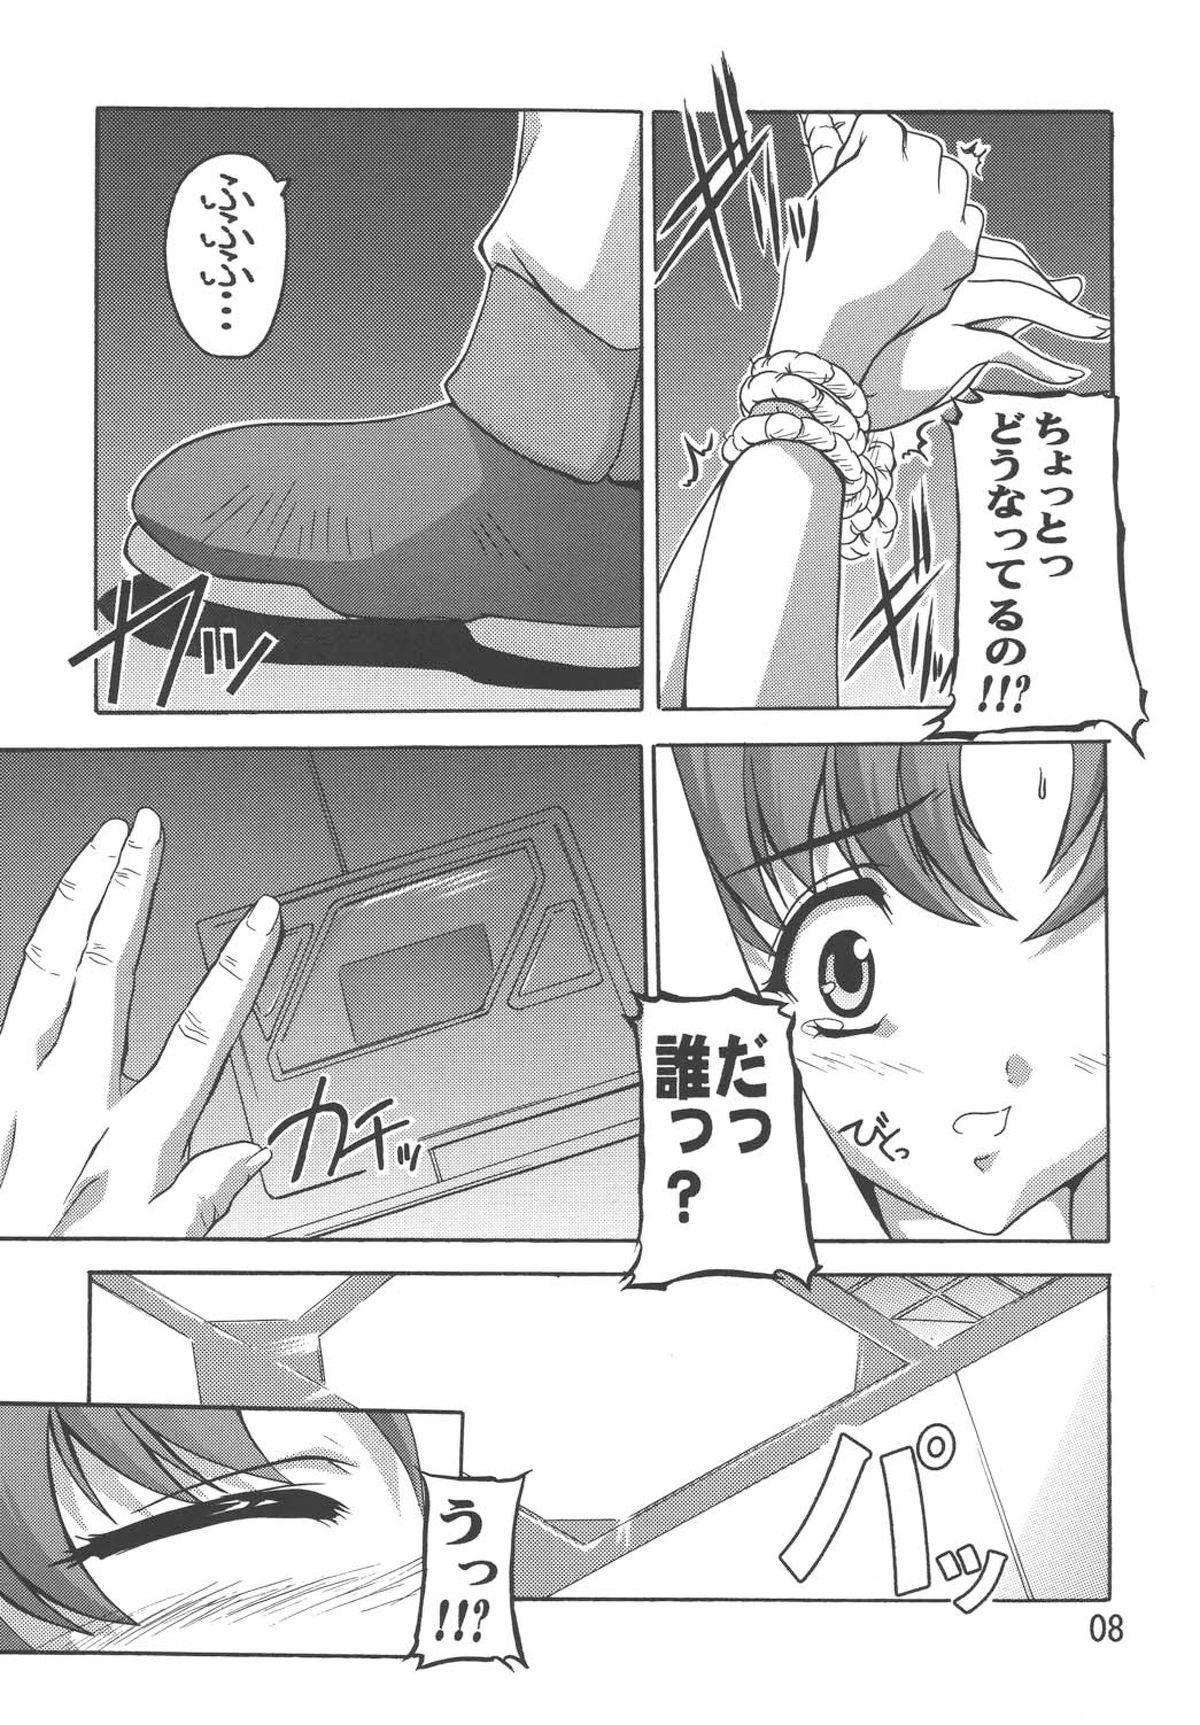 Squirting Miriallia in GUNDAM SEED - Gundam seed Awesome - Page 7